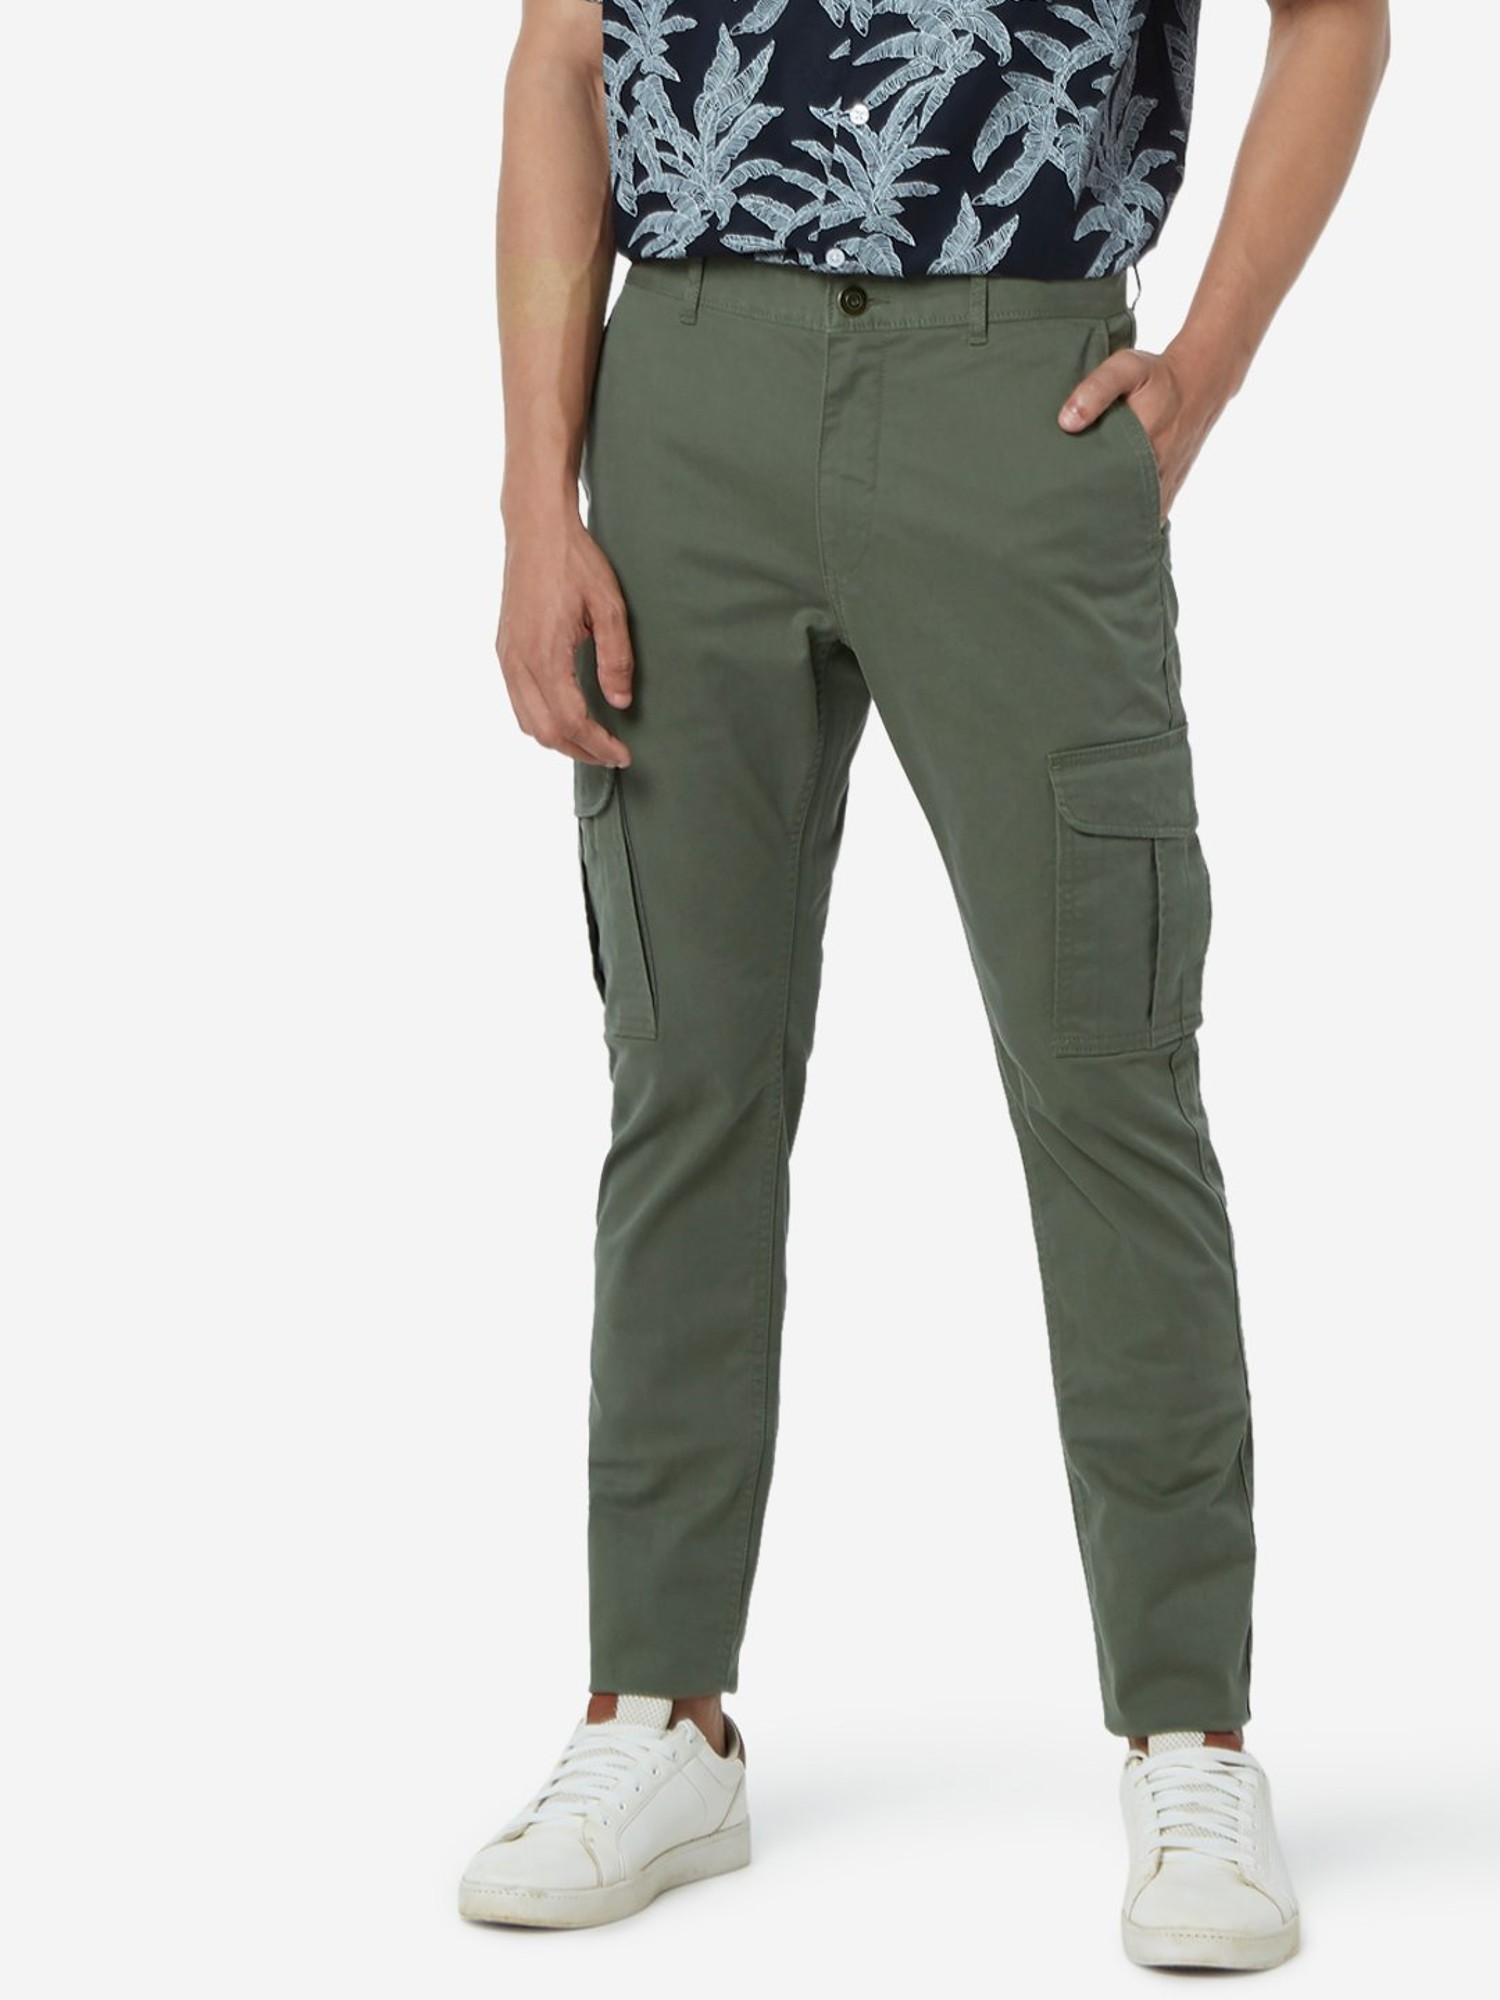 Olive Cargo Pocket Pants with Sesame Design – Mossimo PH